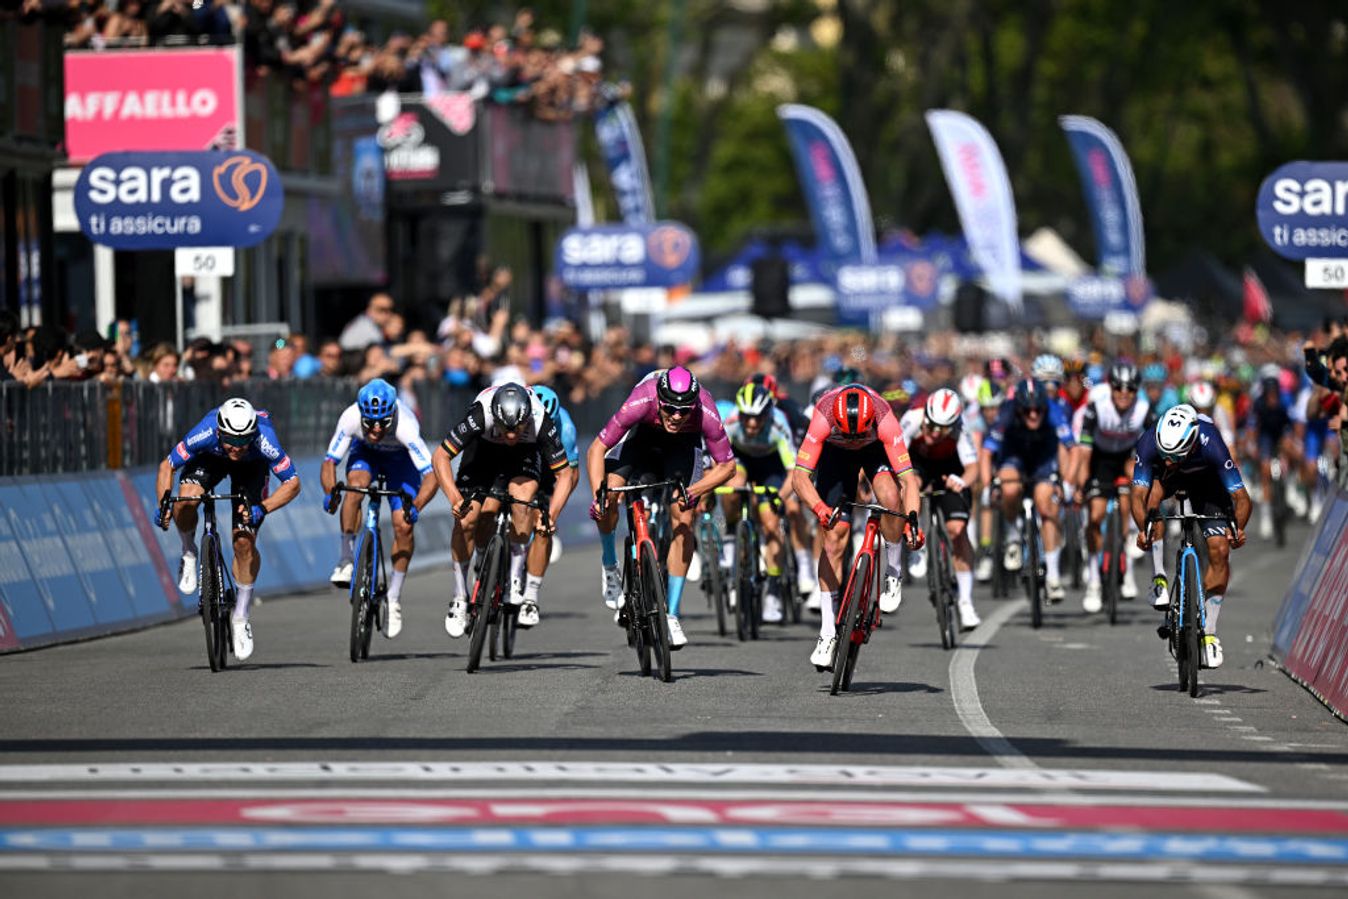 The sprint field is stacked with talent in this year's Giro d'Italia